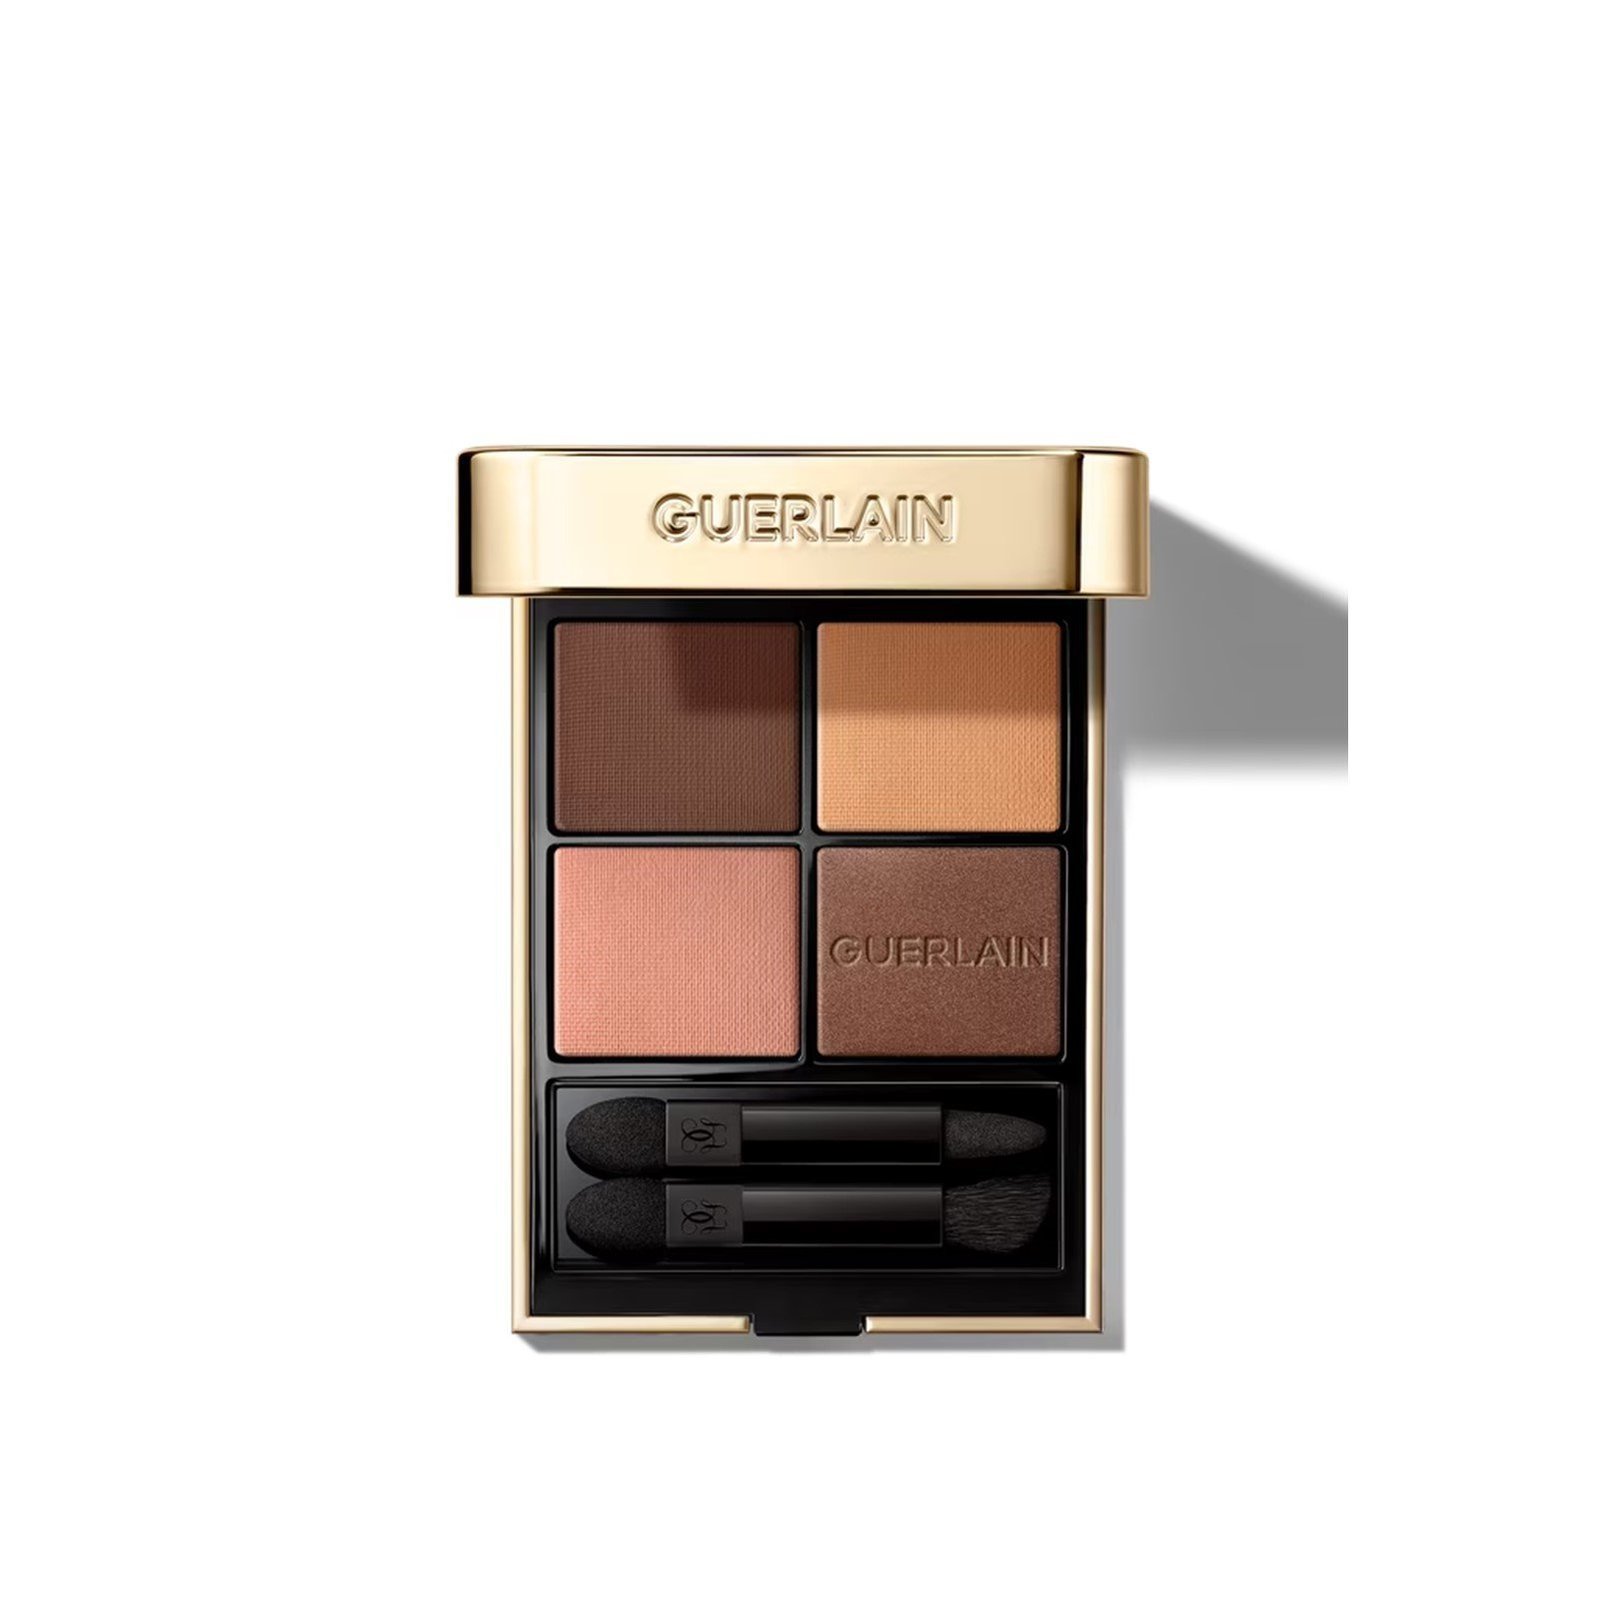 Guerlain Ombres G Multi-Effect Eyeshadow Quad 258 Wild Nudes